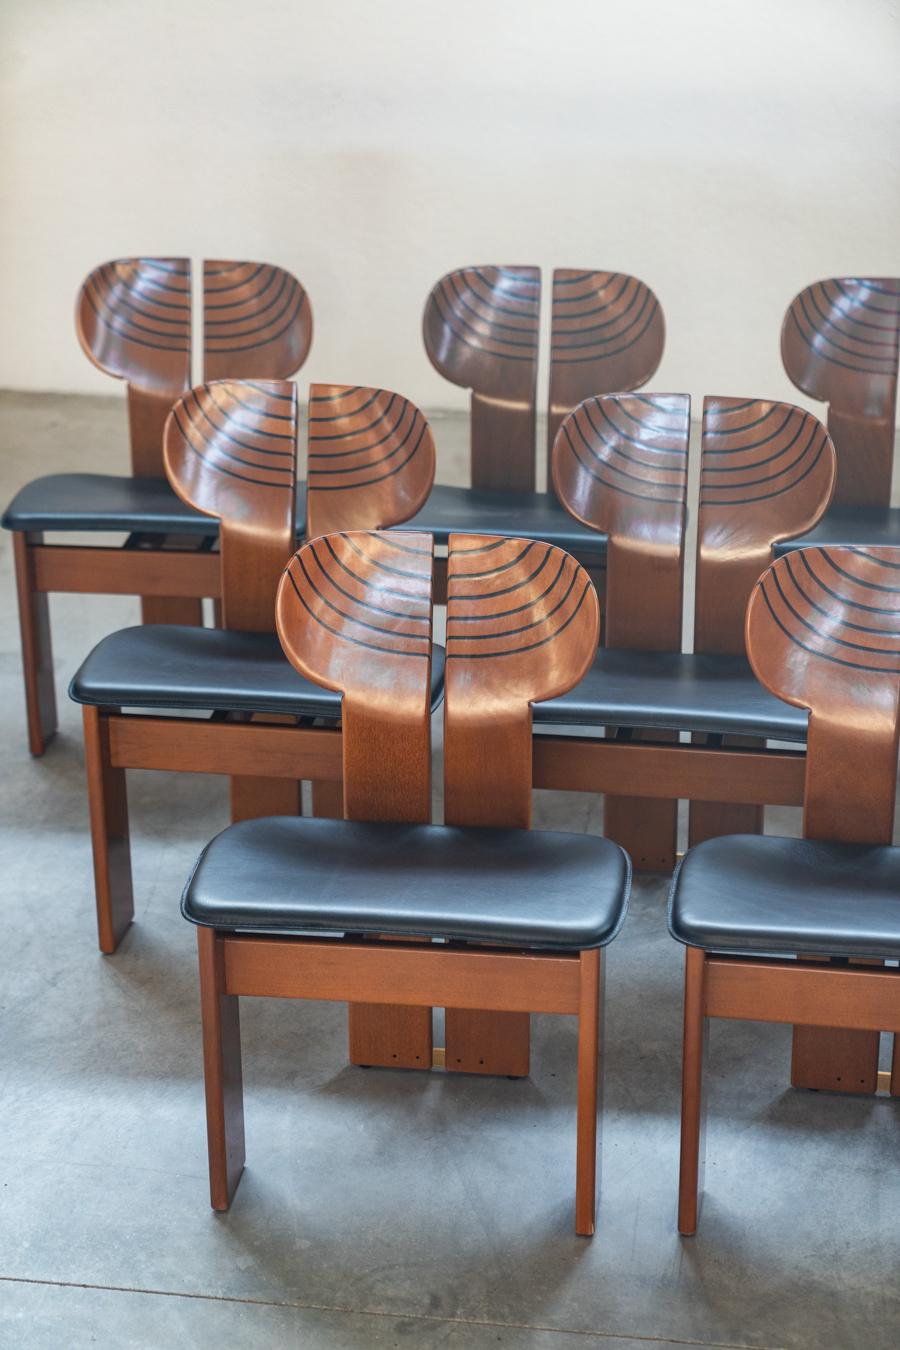 Set 12 chairs Afra & Tobia Scarpa mod. Africa - Gruppo Unico, 80/90 In Excellent Condition For Sale In Manzano, IT